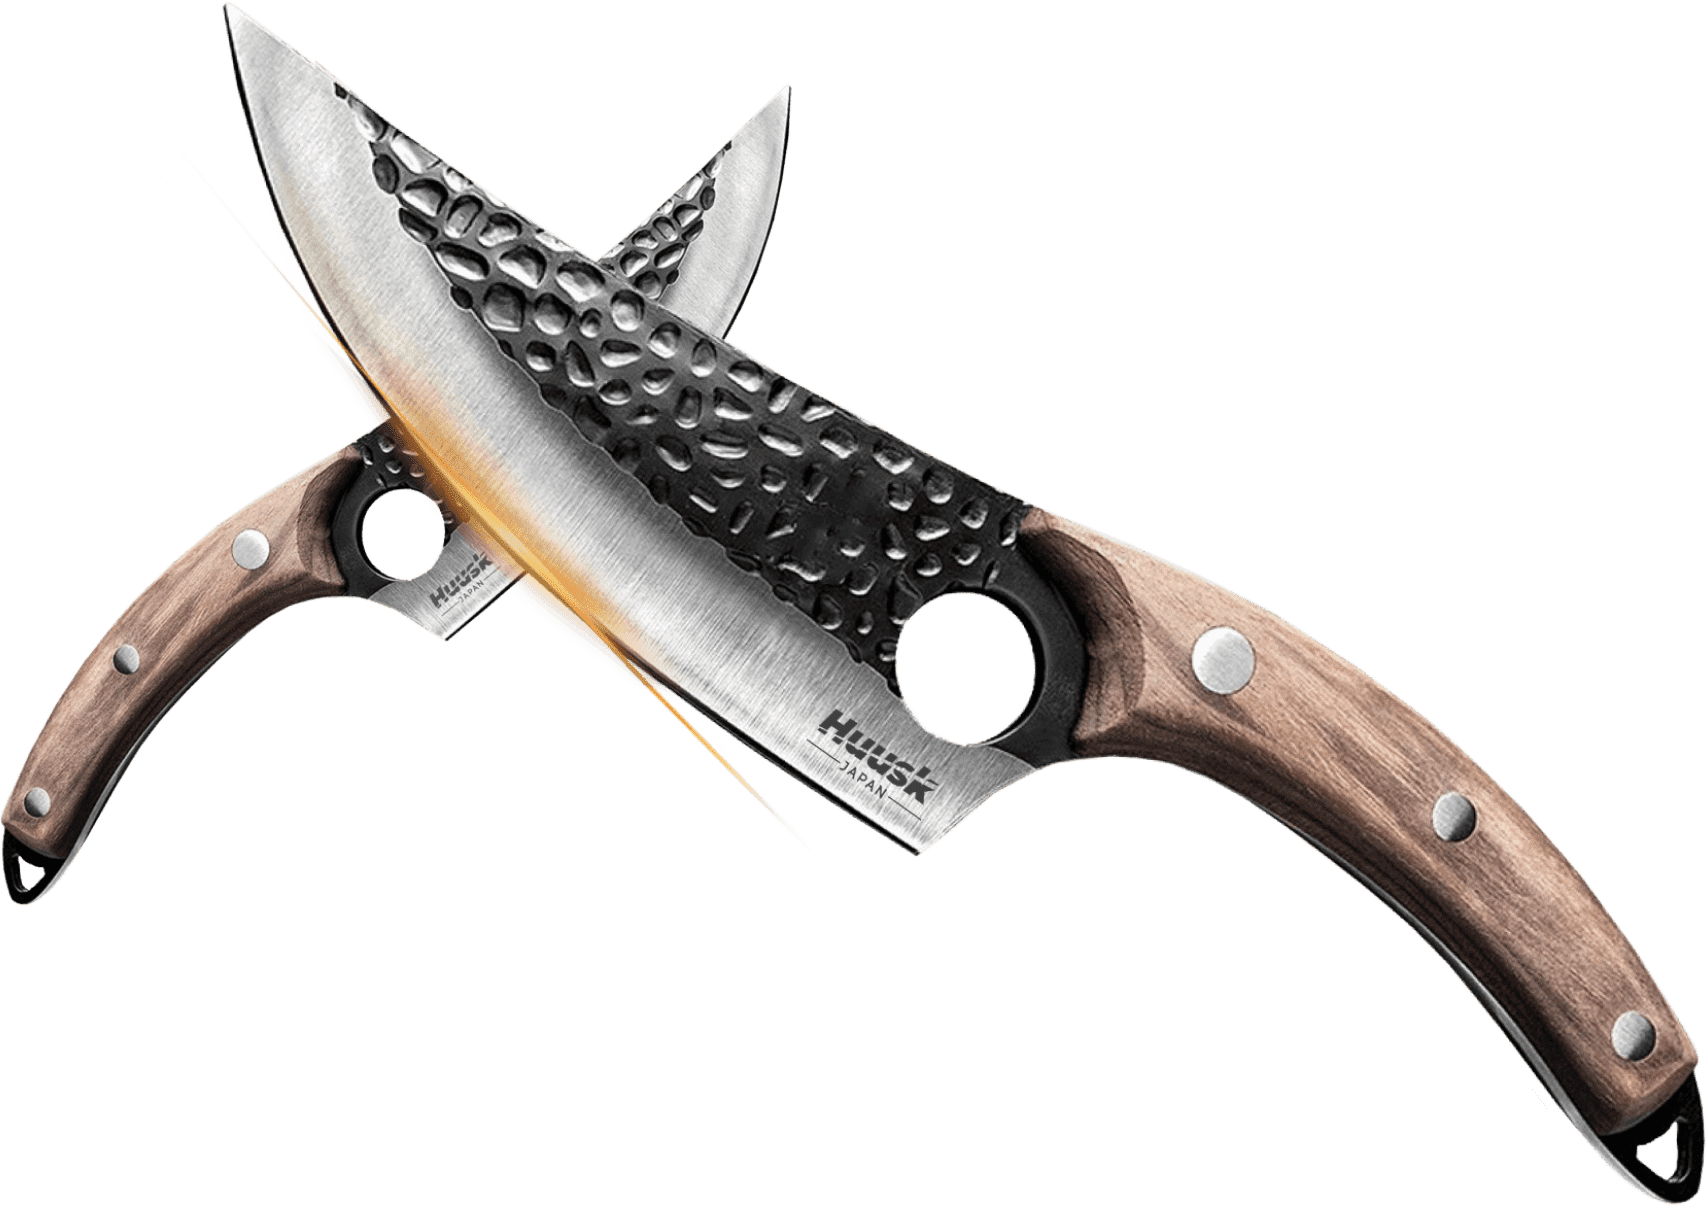 Huusk Hand Made Knives Review 2023: Is This the Best Knife or What?